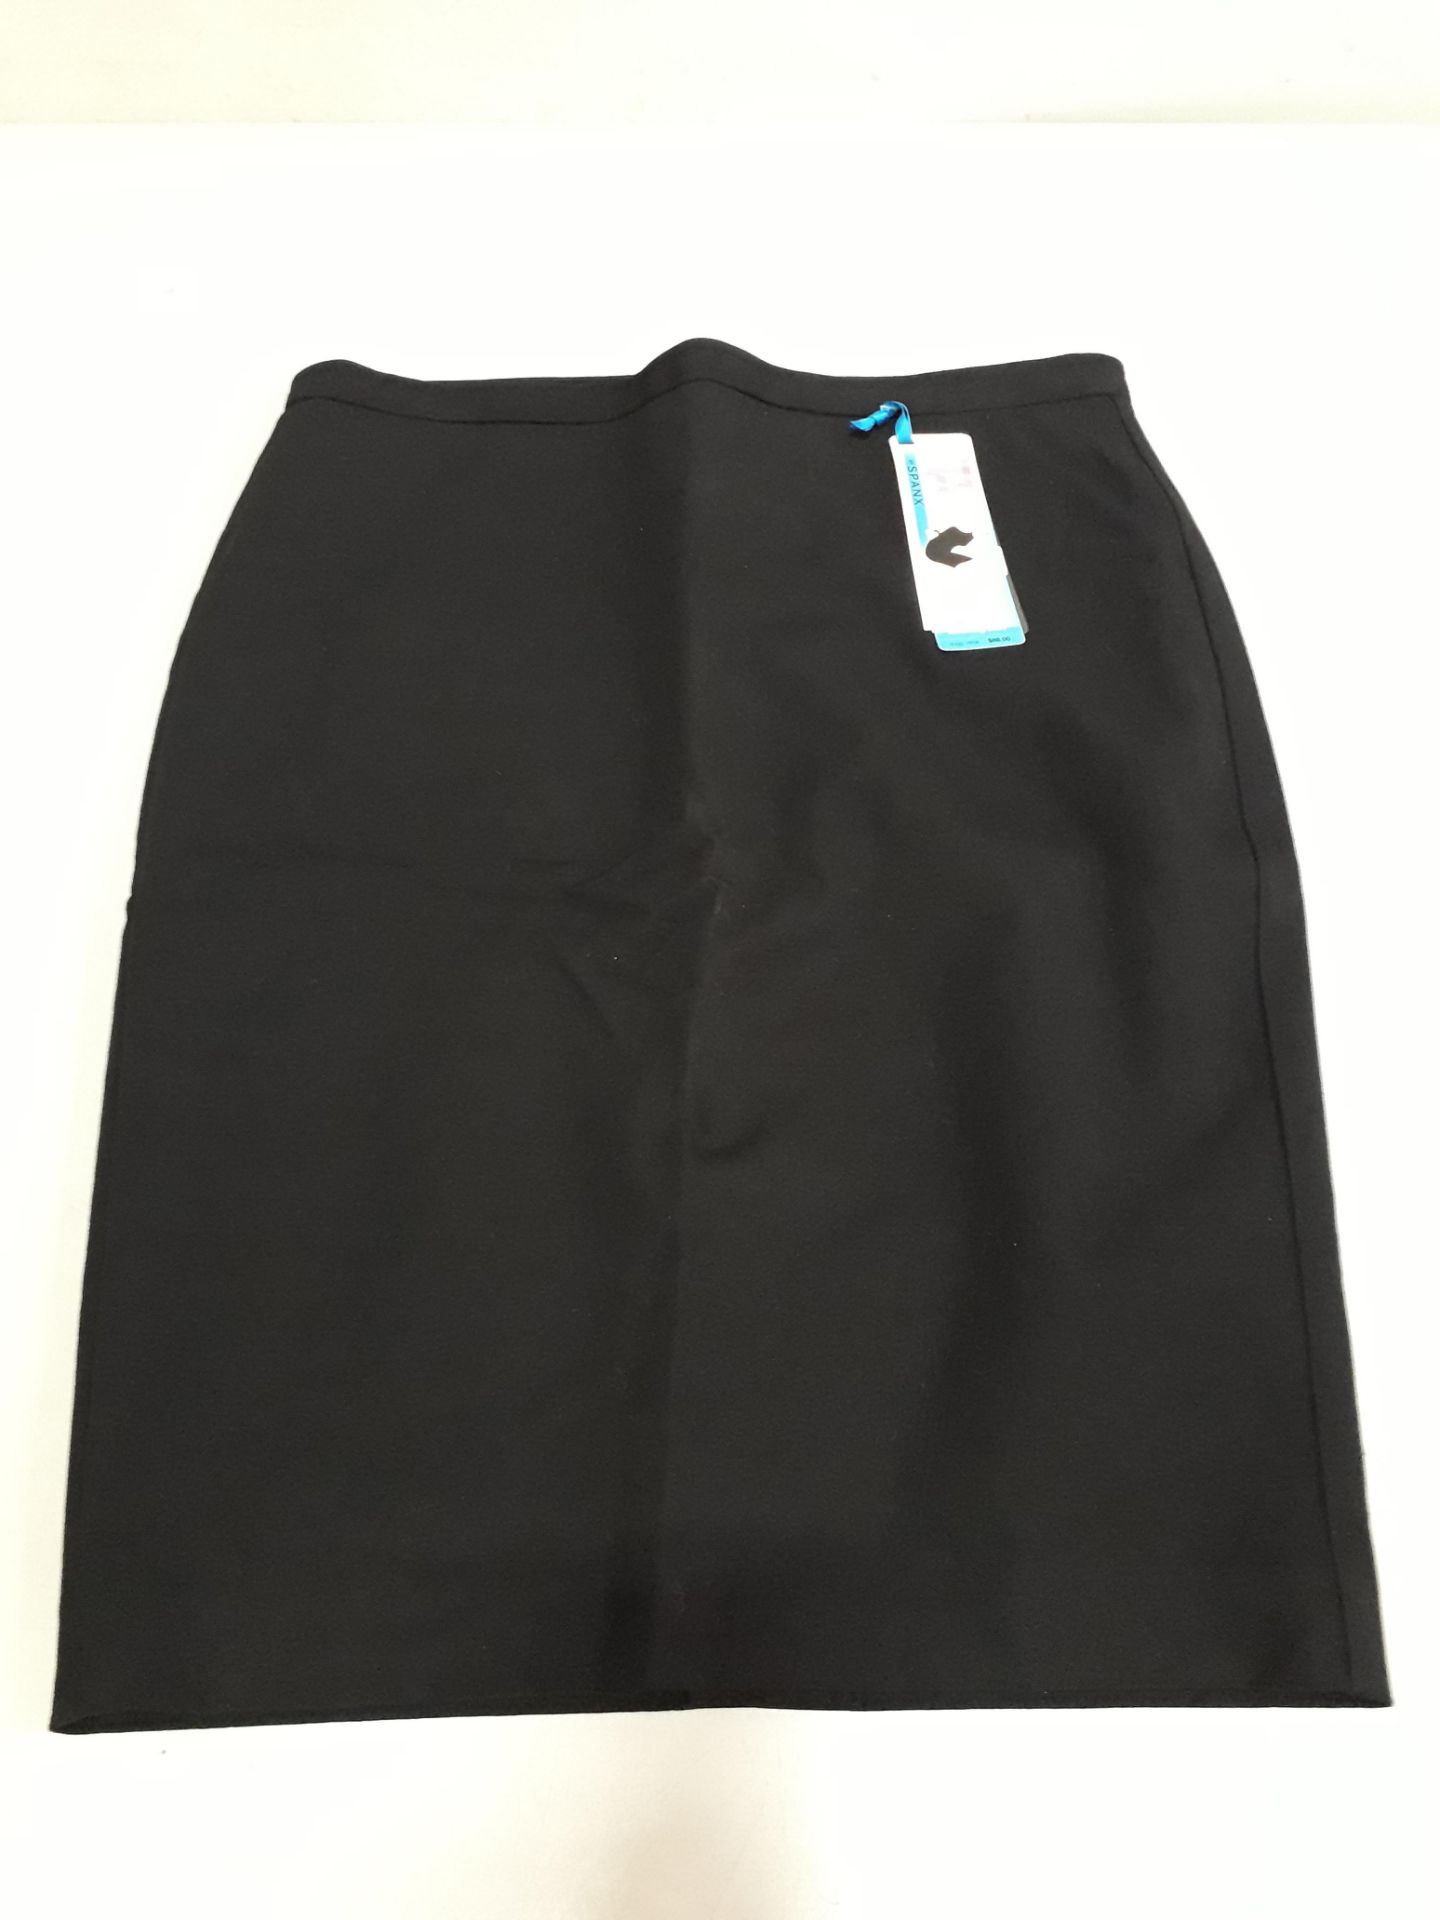 25 X BRAND NEW SPANX SLIMMING SKIRT ALL IN BOLD BLACK AND ALL IN ( SIZE 12 ) RRP $ 61.60 TOTAL RRP $